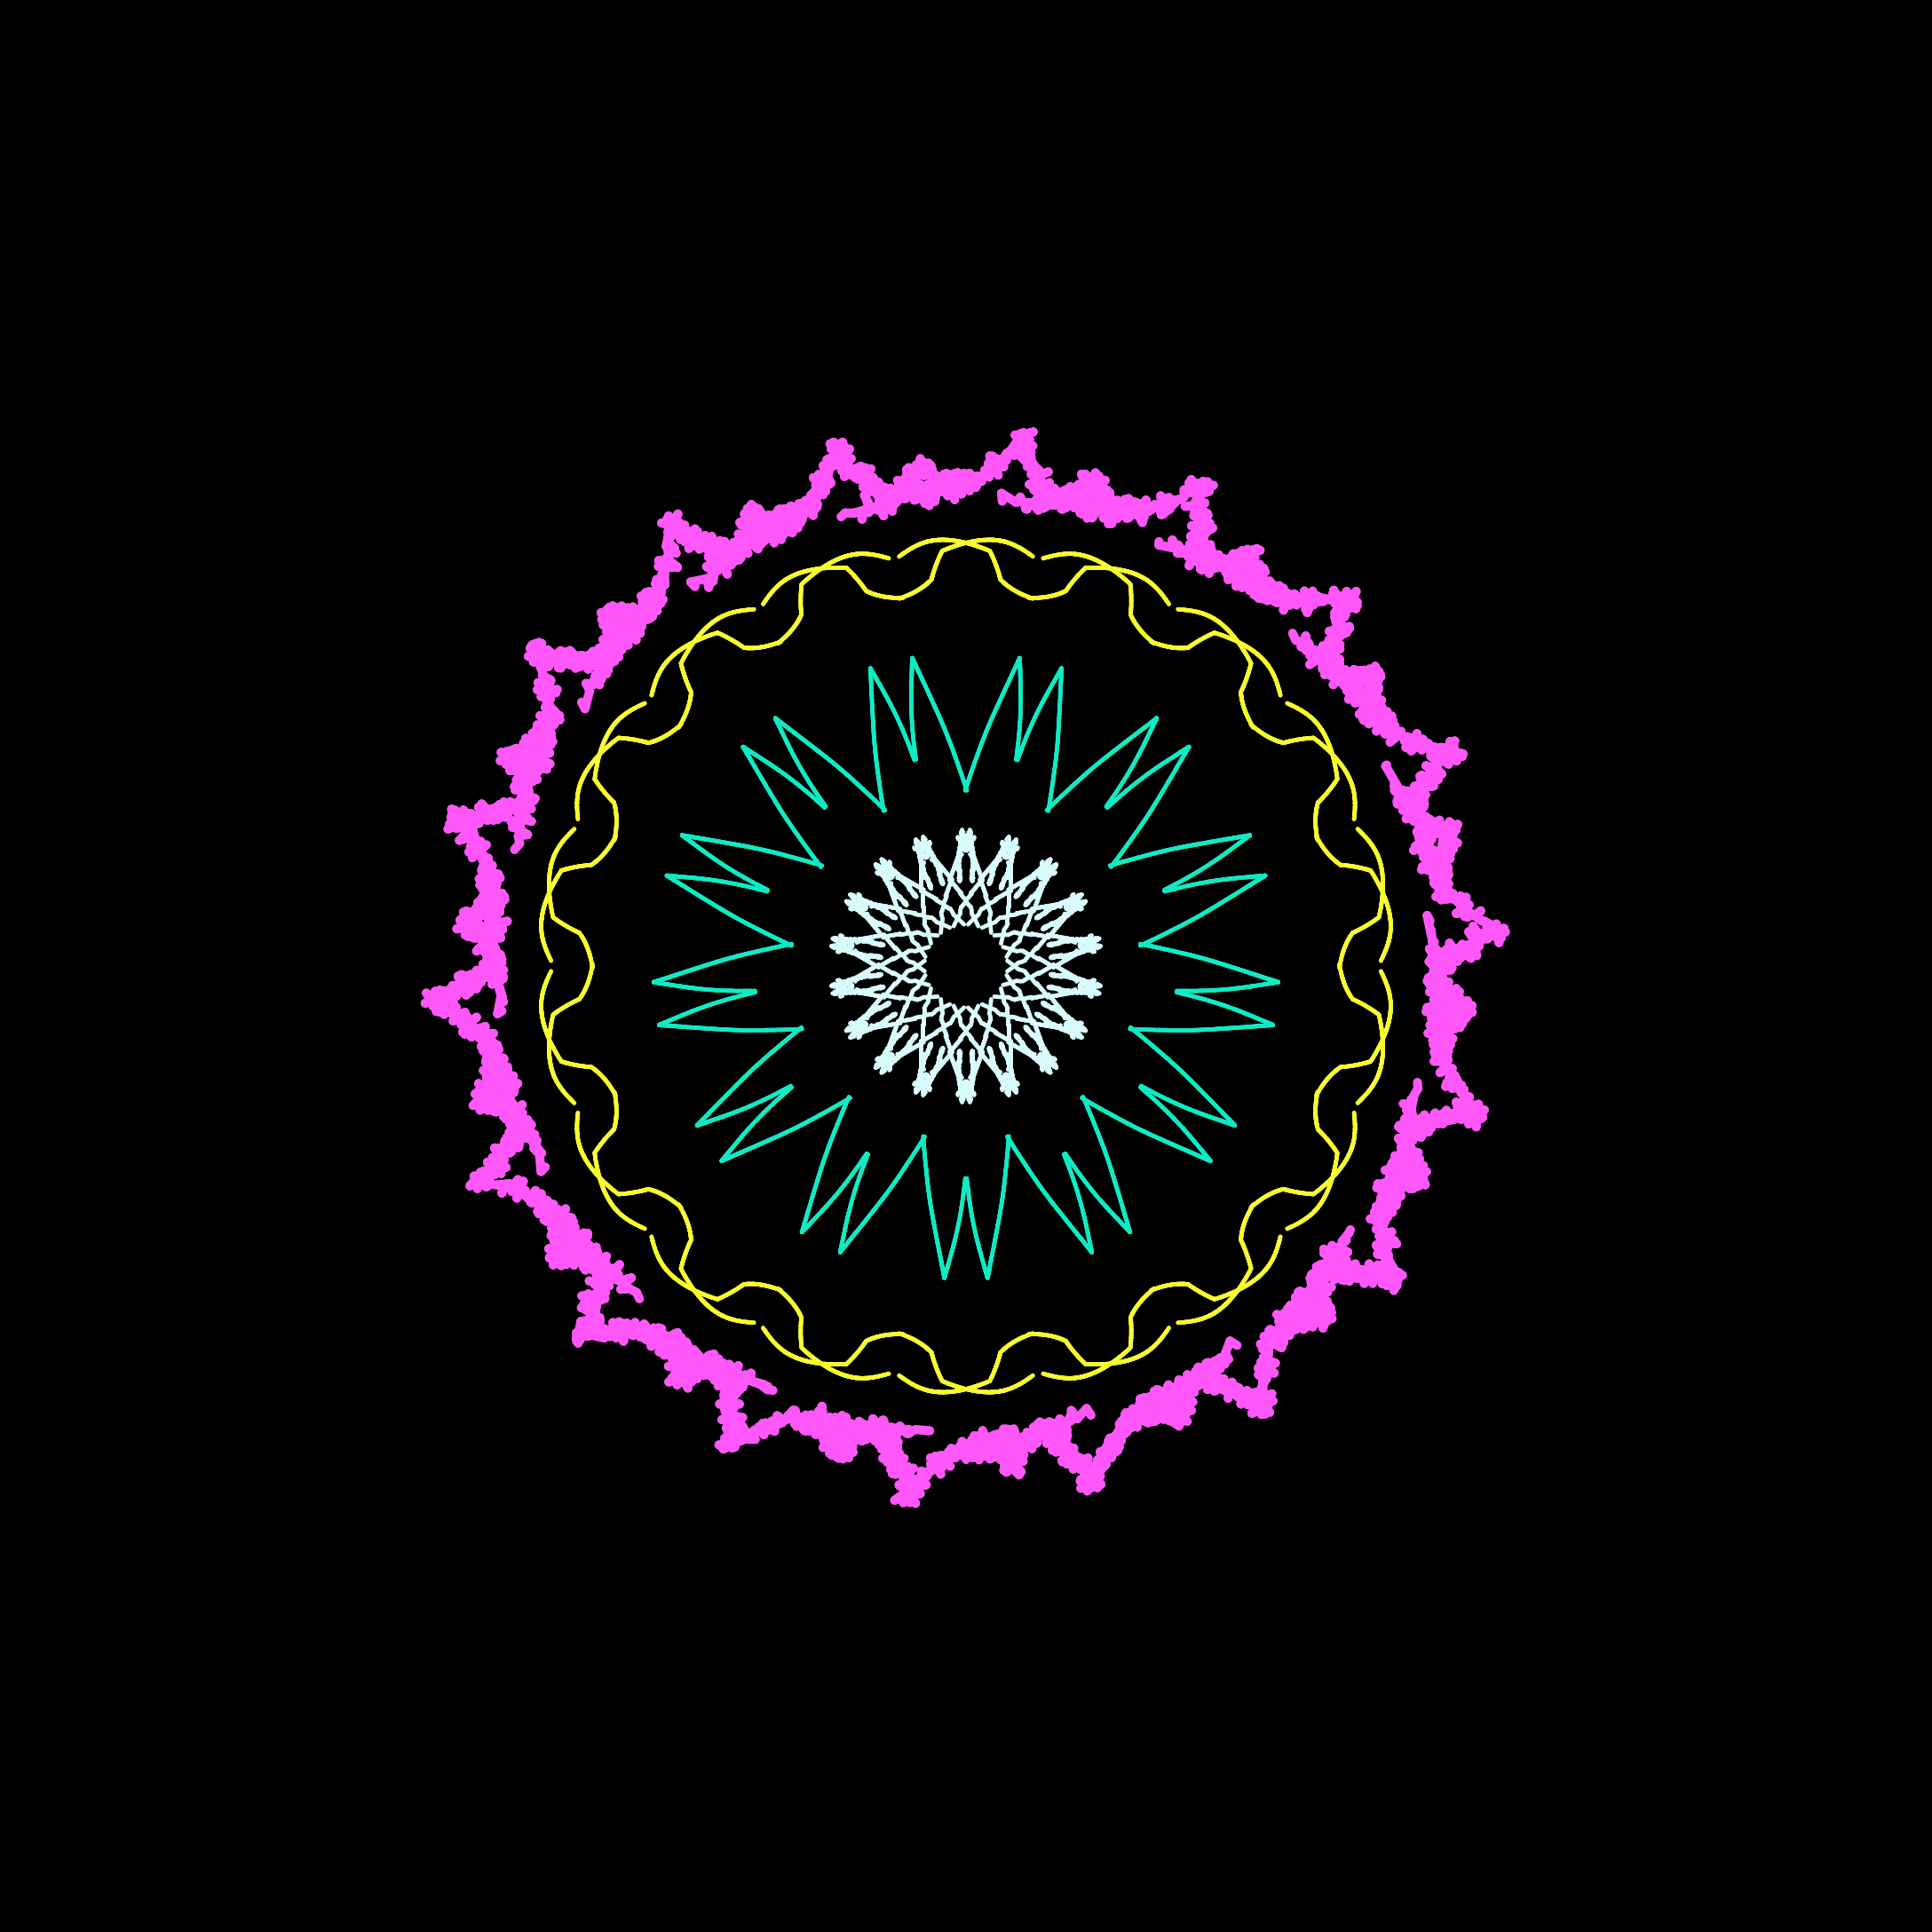 Radial_20180315_091303.png